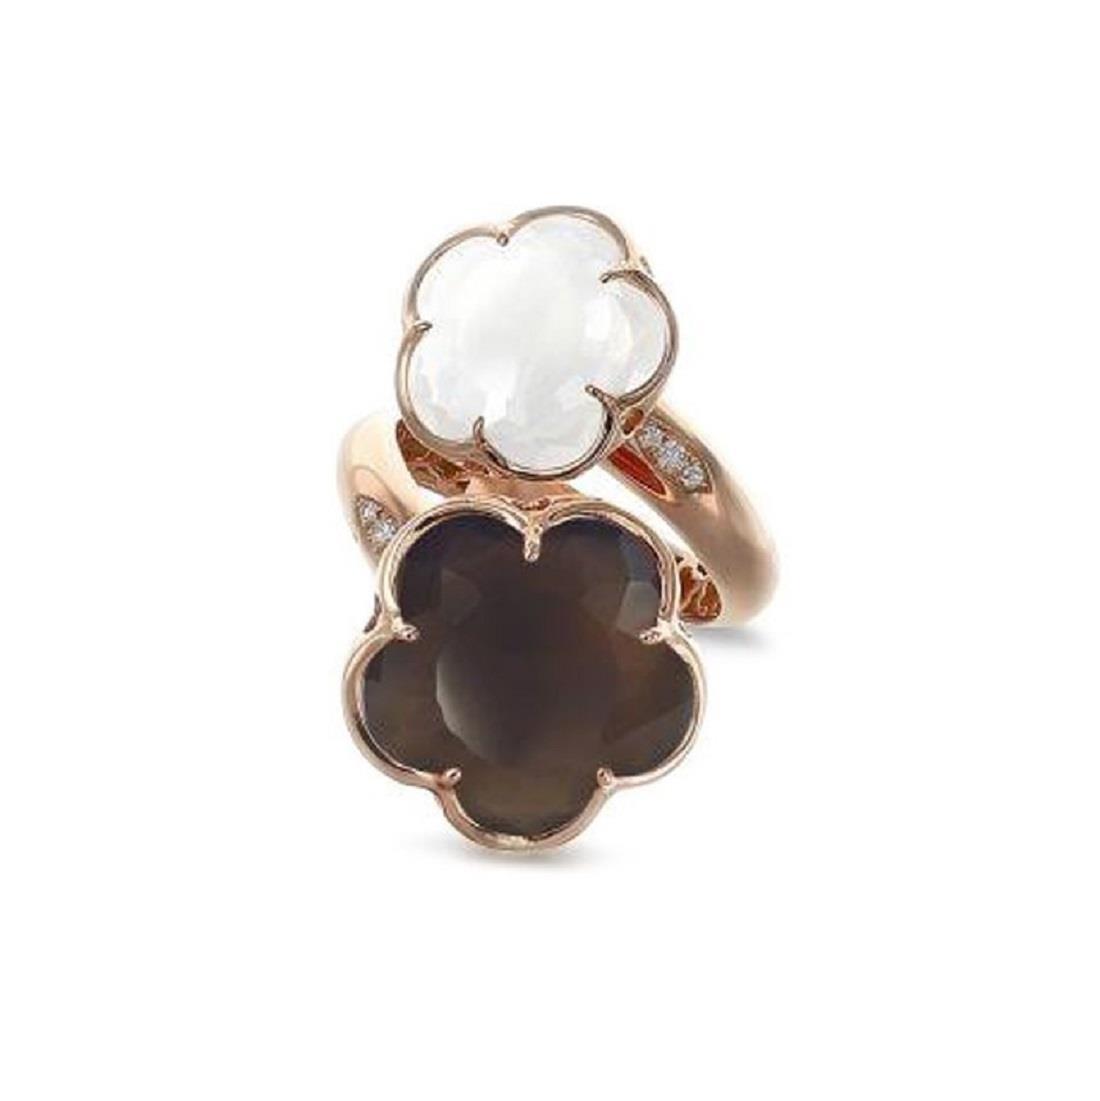 Bon Ton contrariè ring in red gold with white and smoky quartz - PASQUALE BRUNI